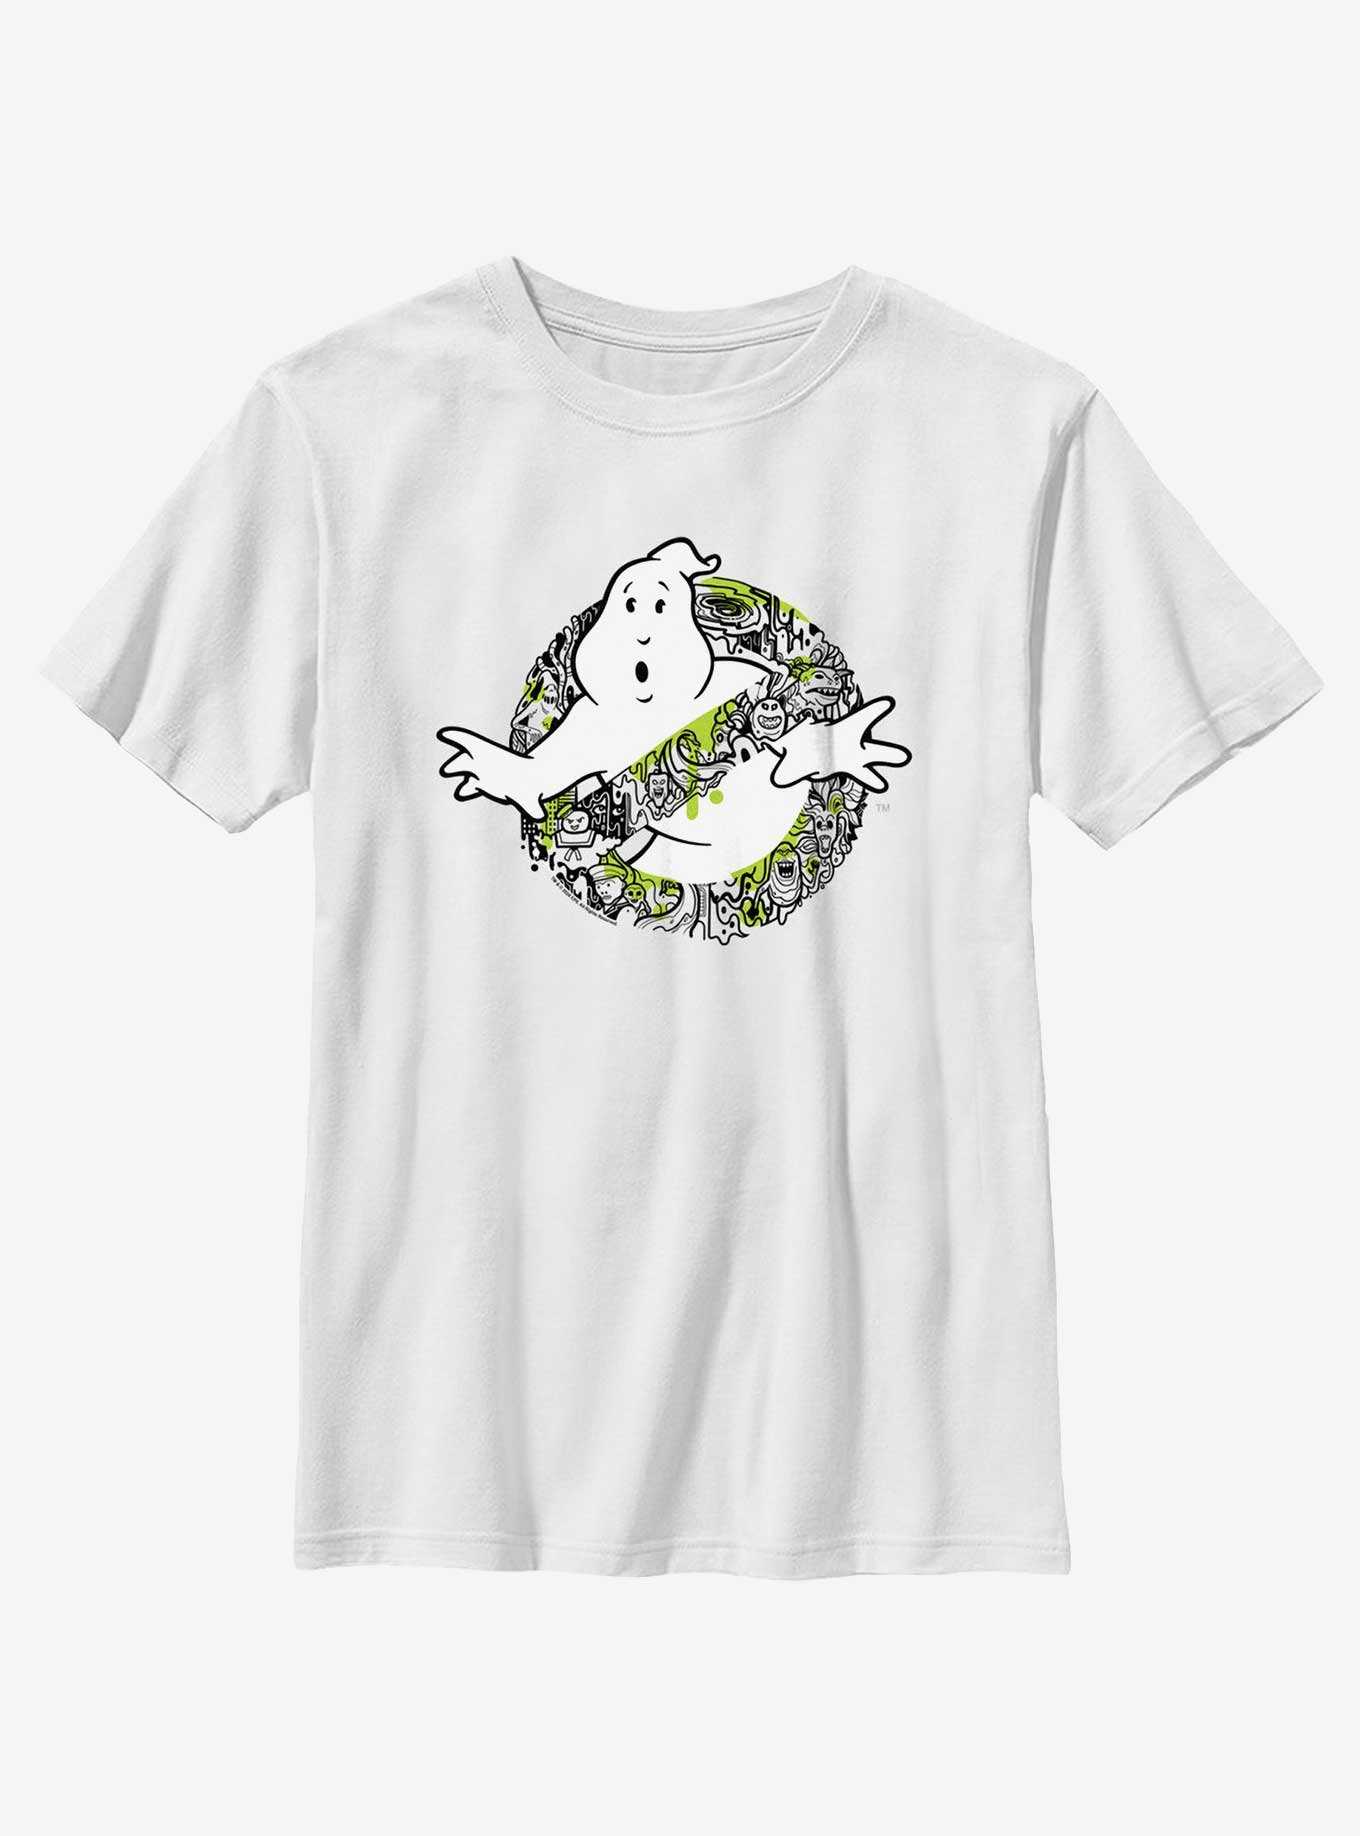 Ghostbusters: Frozen Empire Busting Ghosts Youth T-Shirt, , hi-res